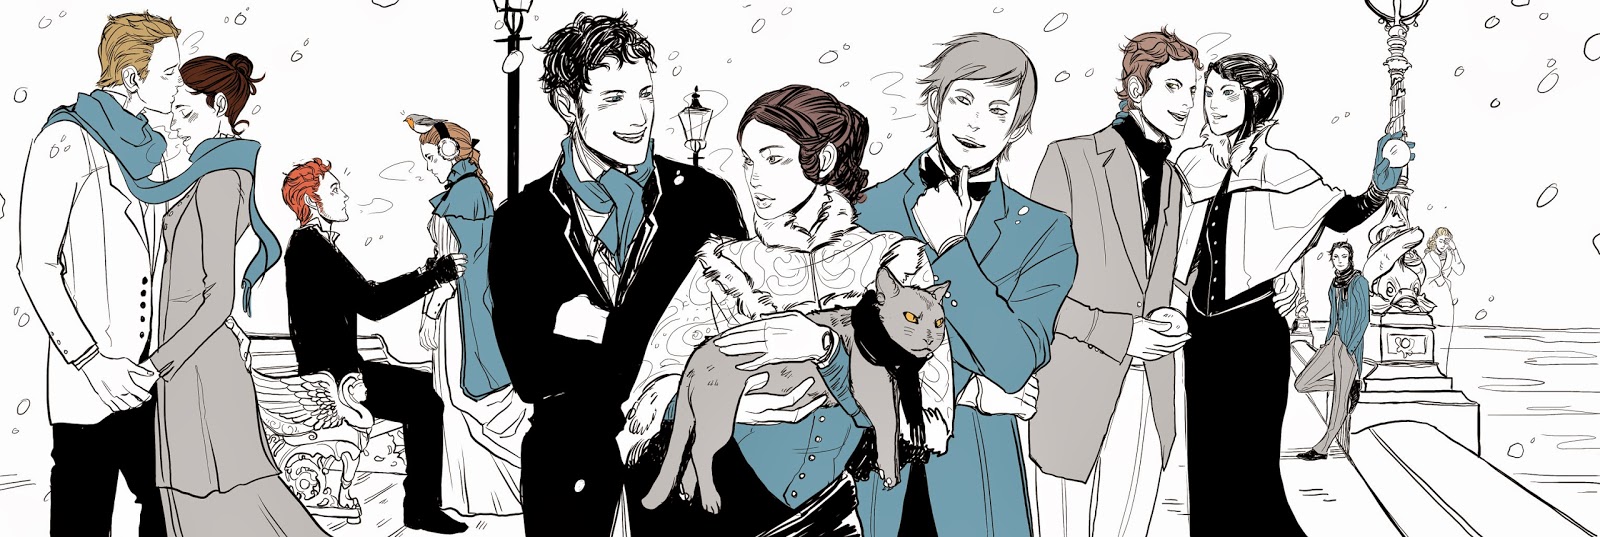 The Characters of The Infernal Devices, adorned in Victorian clothing.